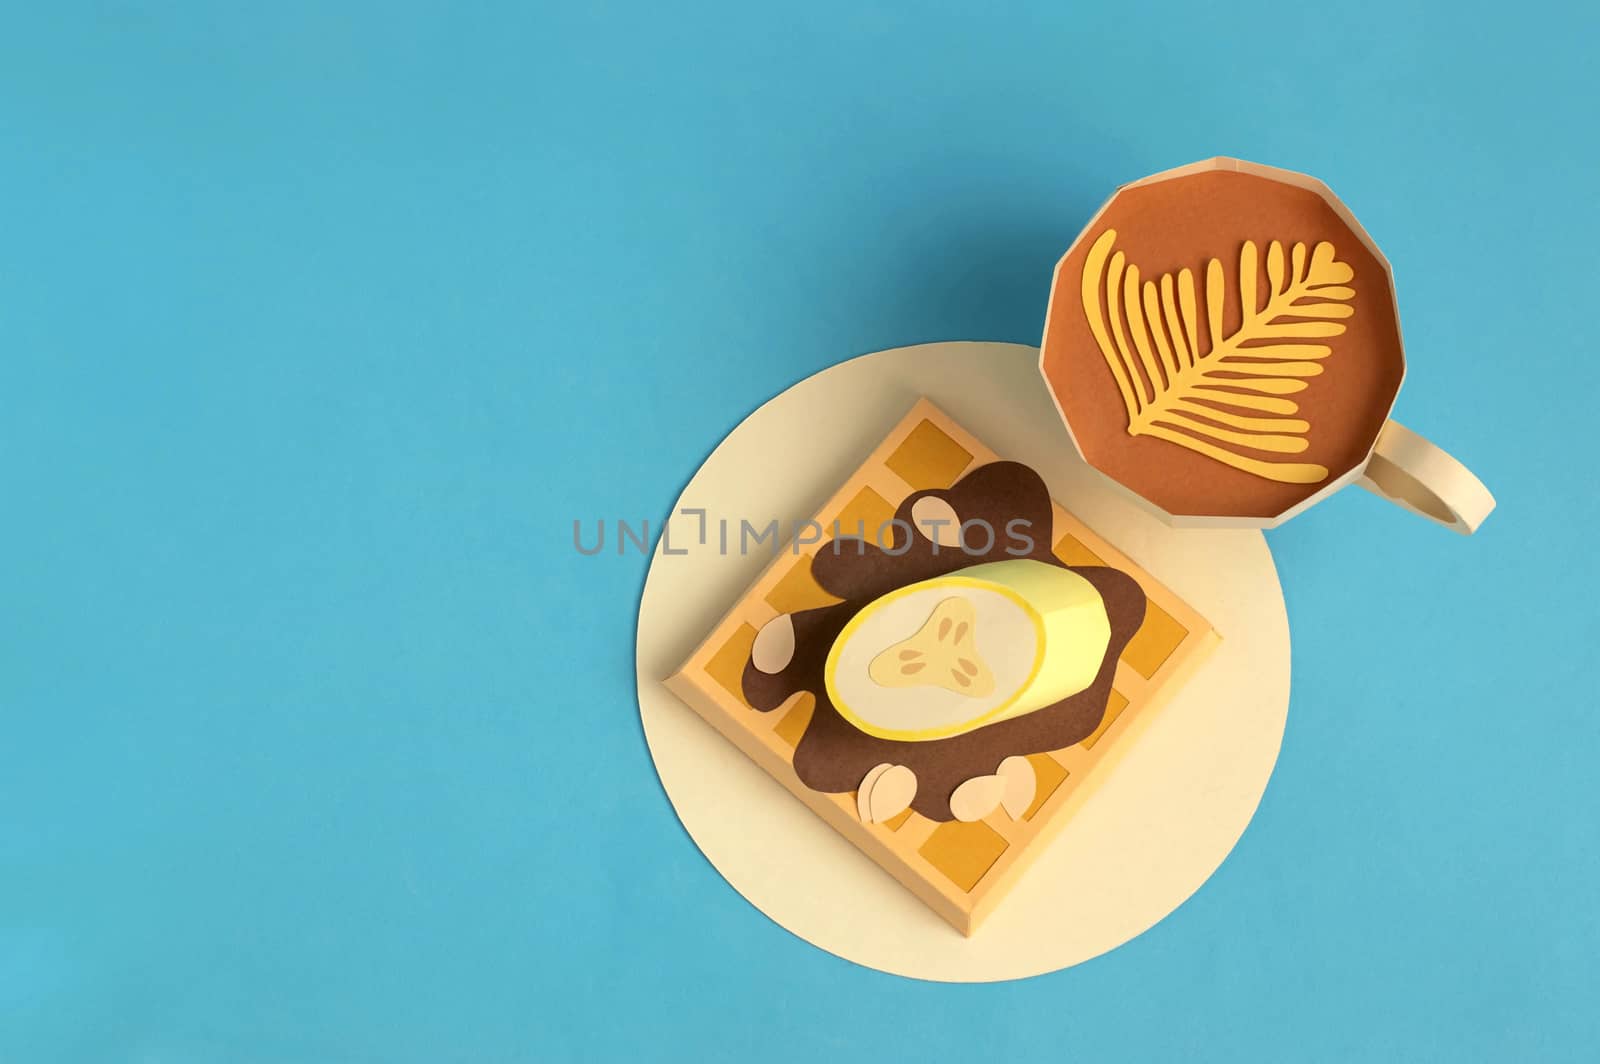 Belgian waffles with chocolate syrup, almonds and banana, cup of cappuccino made of paper. Real volumetric handmade paper objects. Paper art and craft